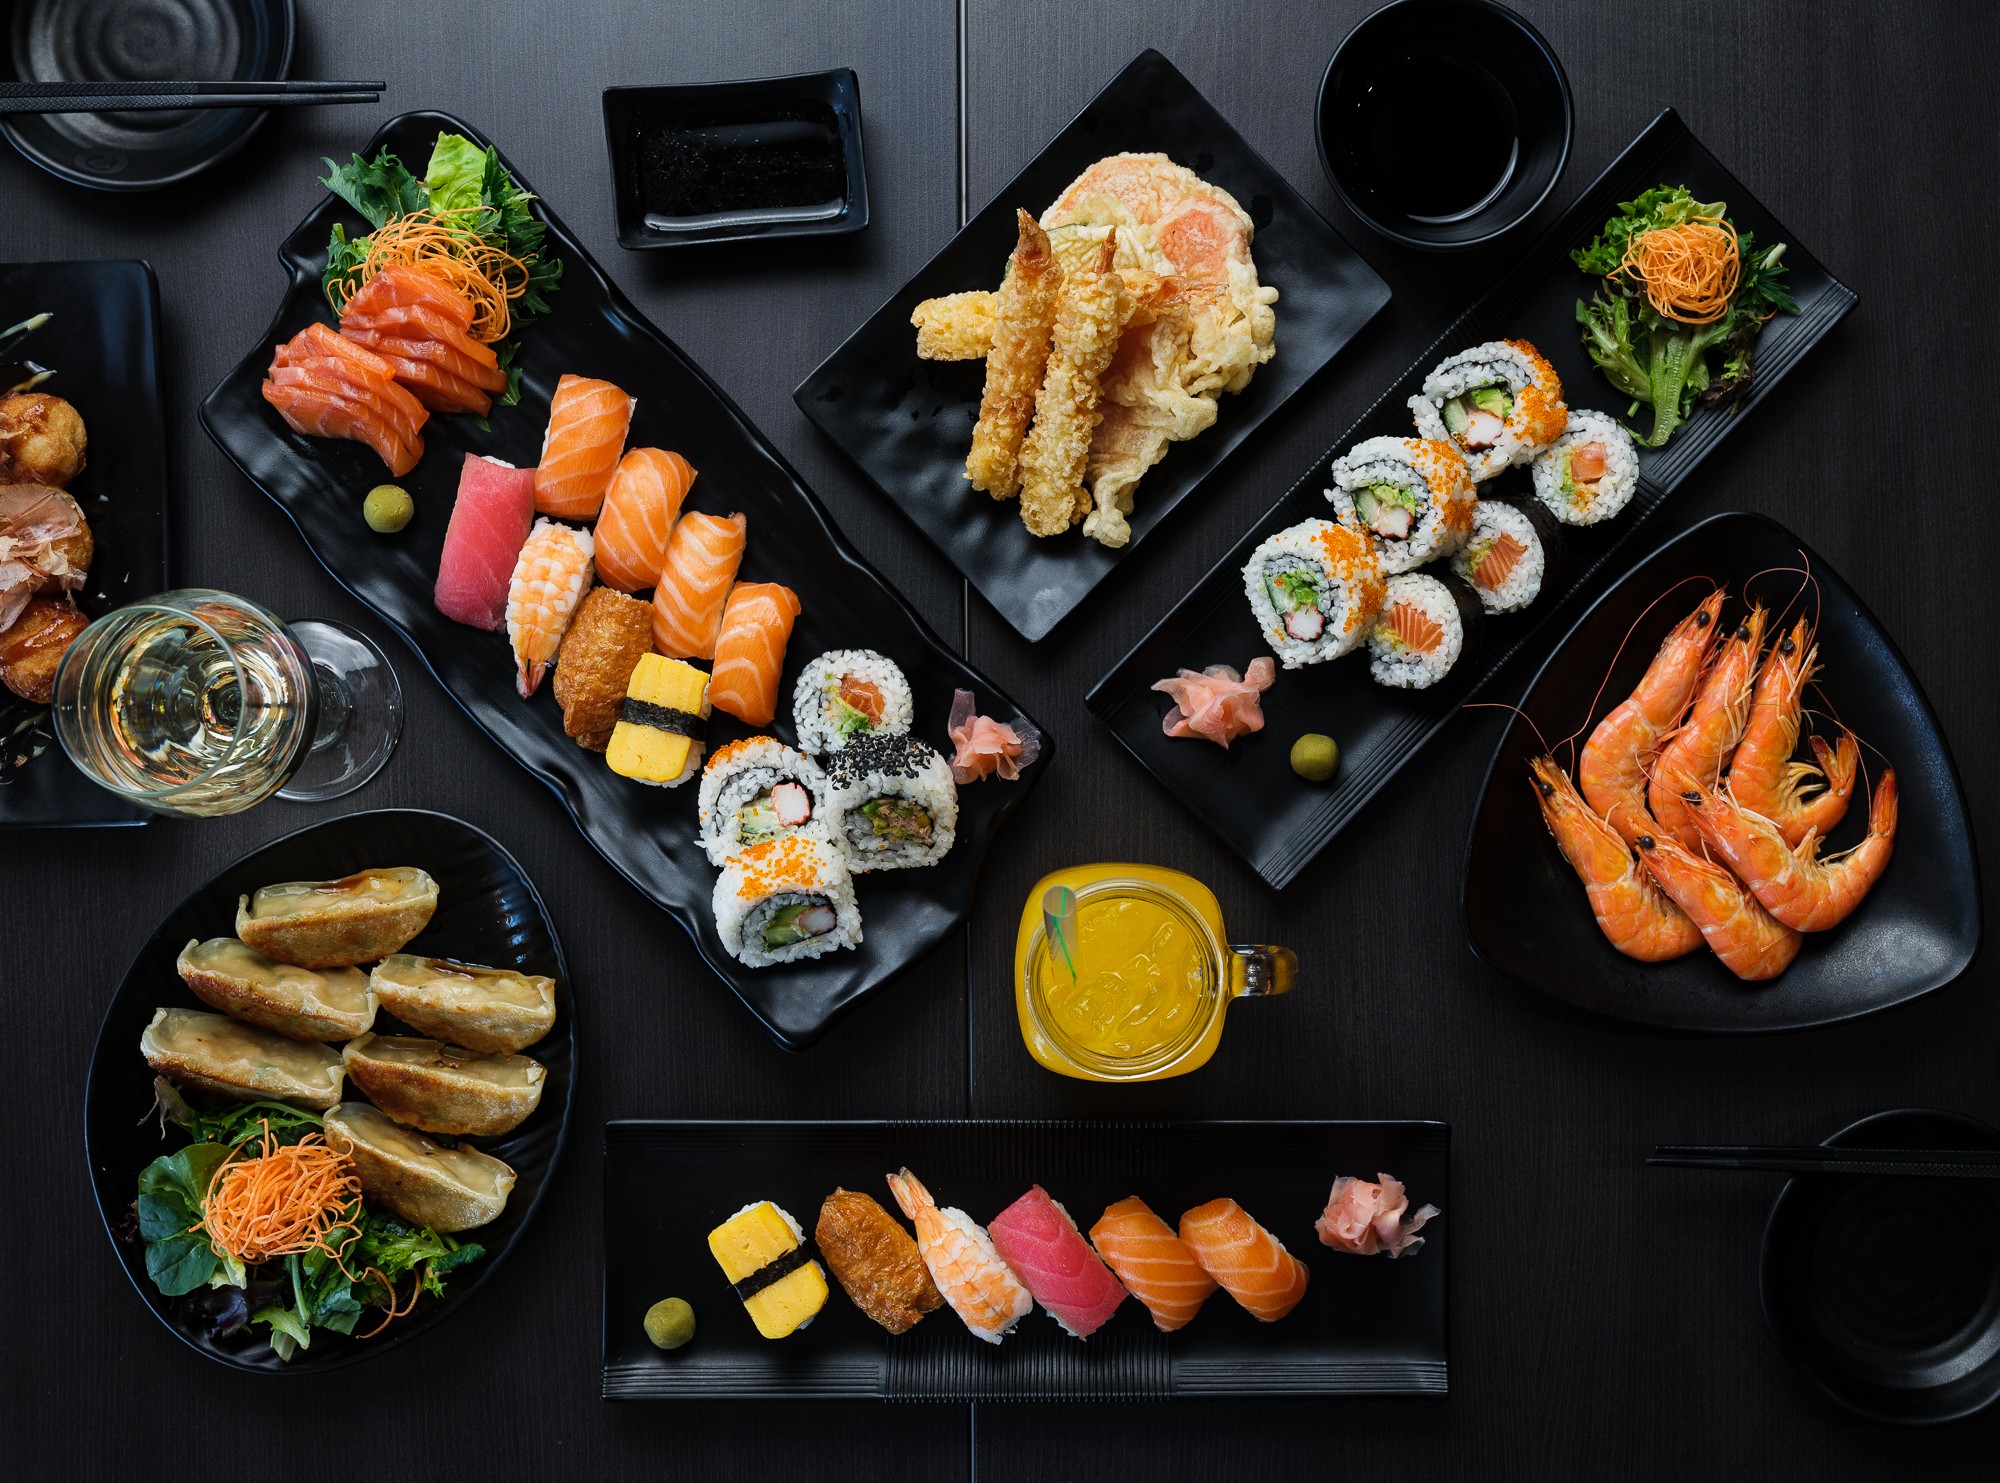 Hot in the City: Okami to open all you can eat Japanese restaurant in Mawson